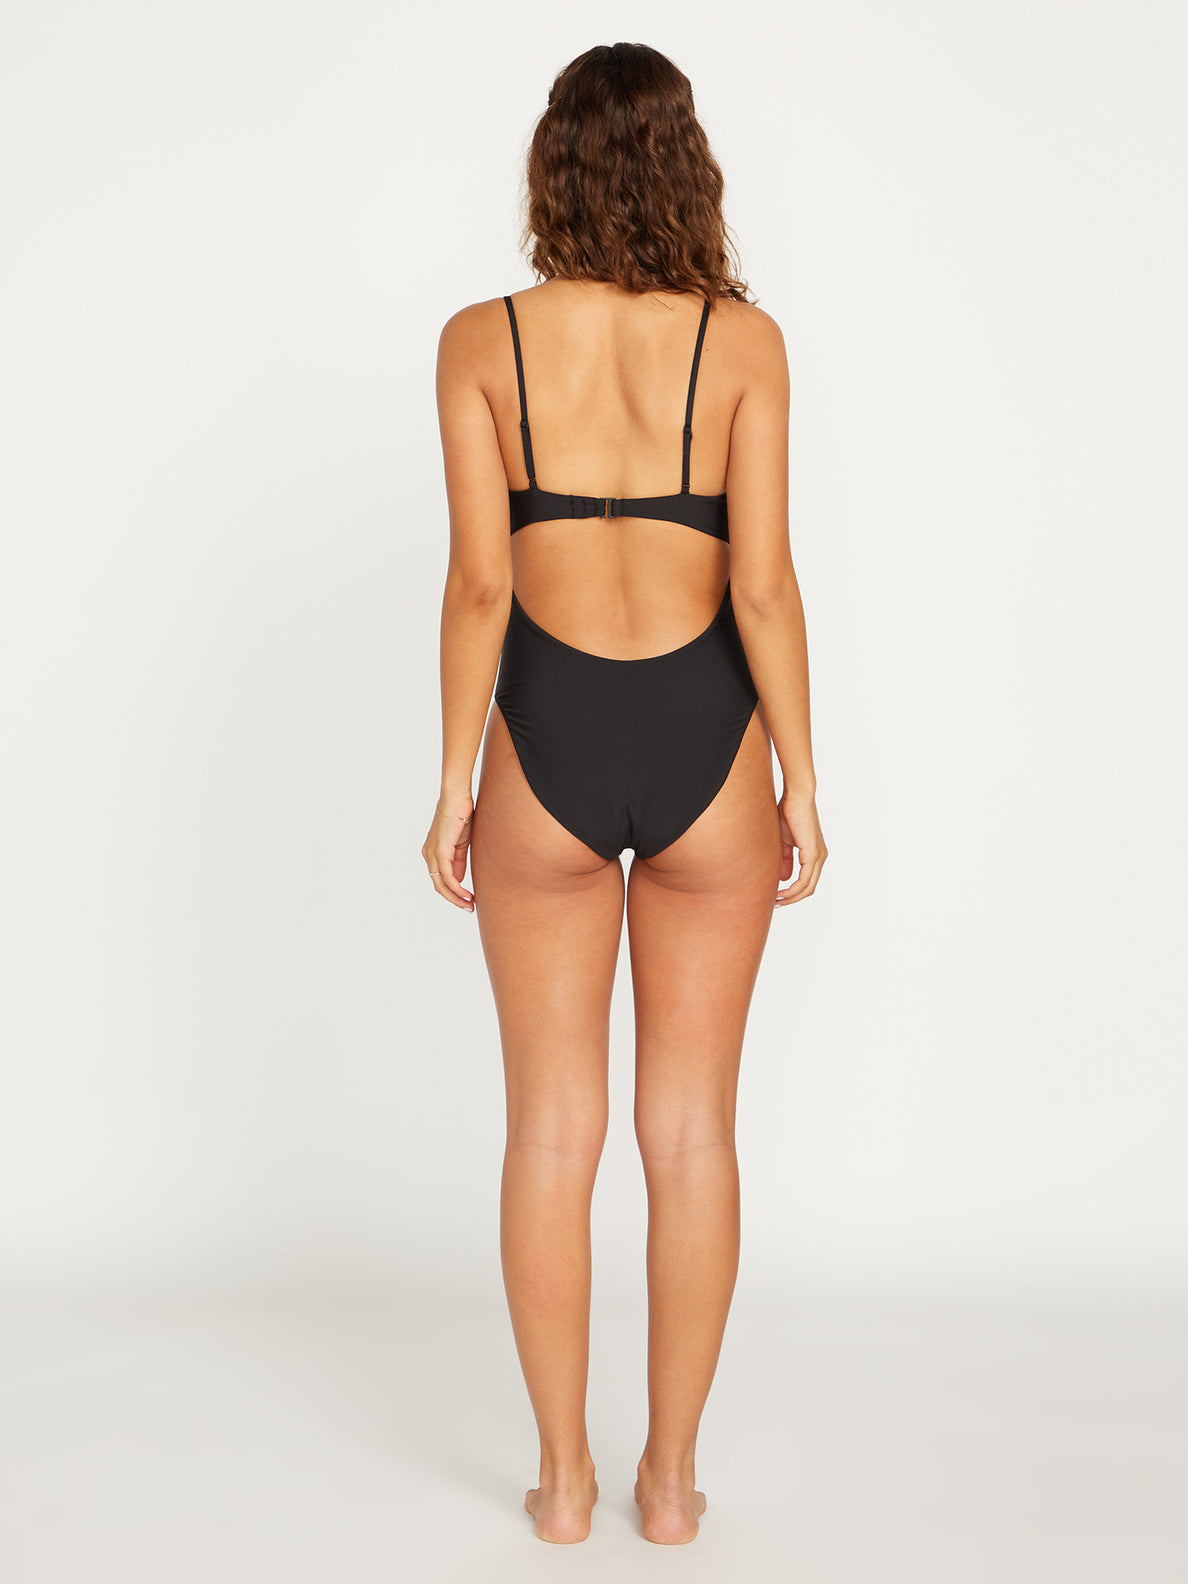 Simply Seamless Cut Out One-Piece - Black